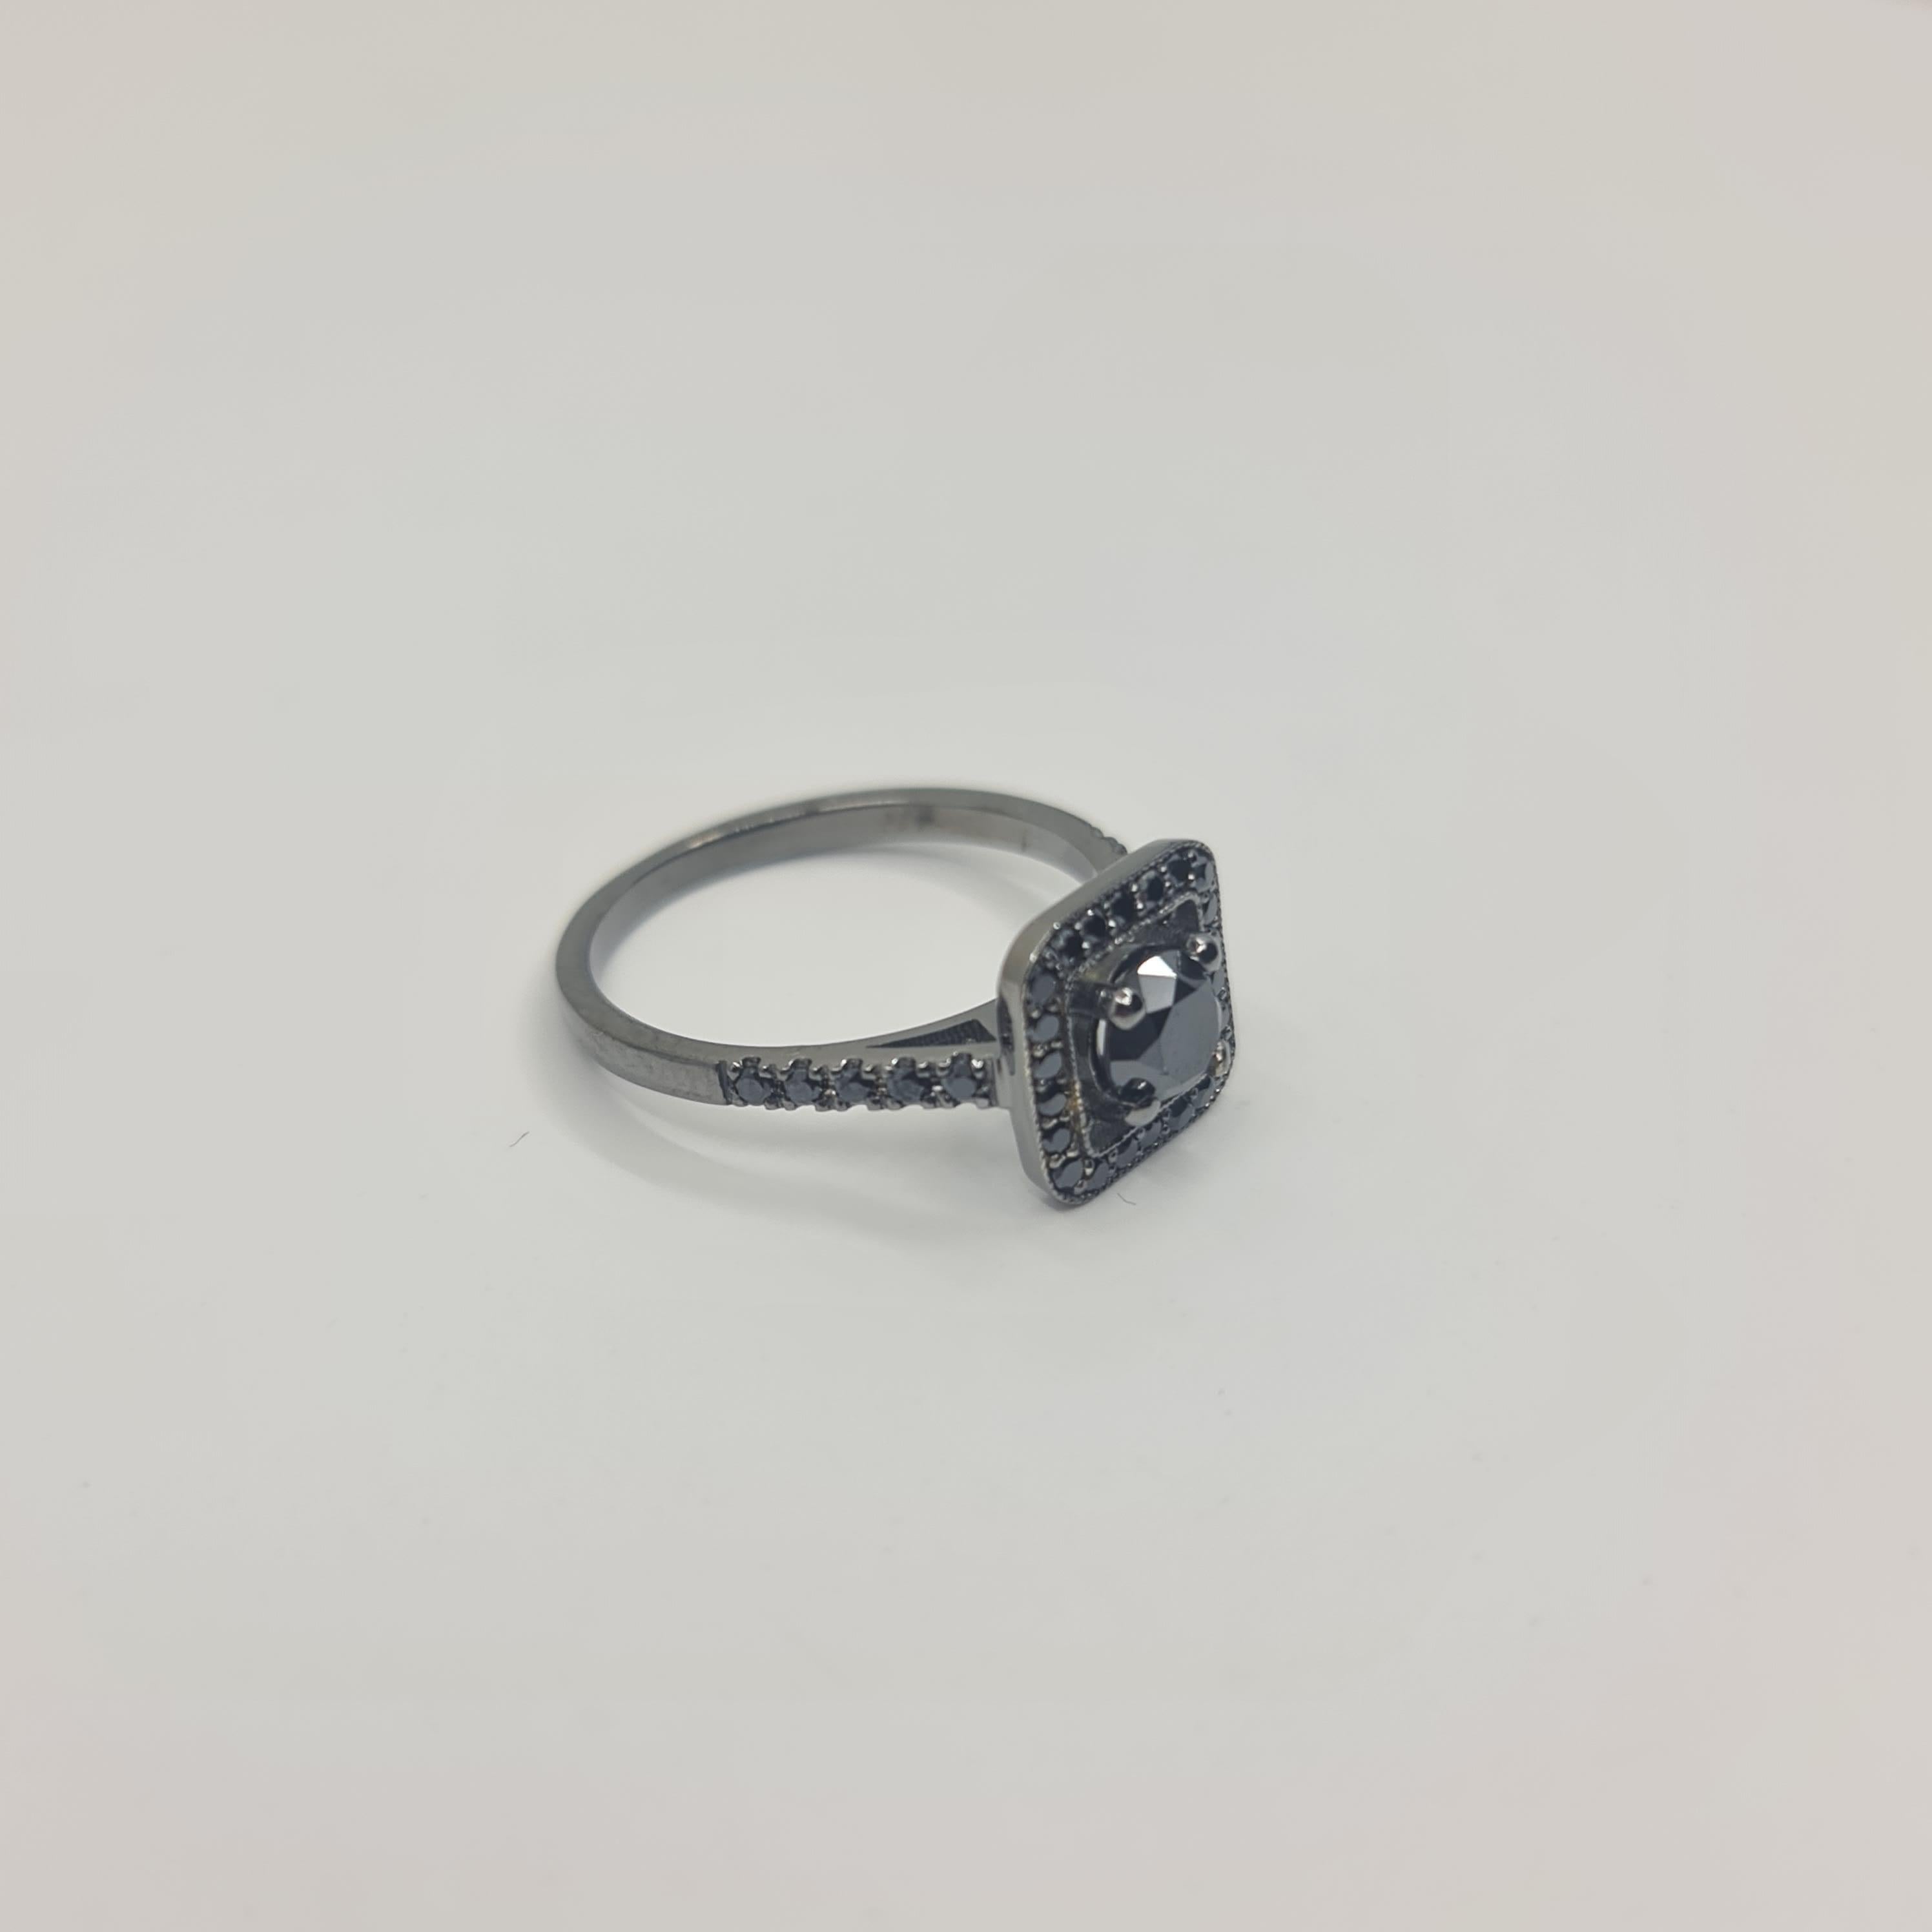 Modern Exquisite Black Diamond Halo Ring 0.88 Carat in 18K Black Gold Round Cut For Sale